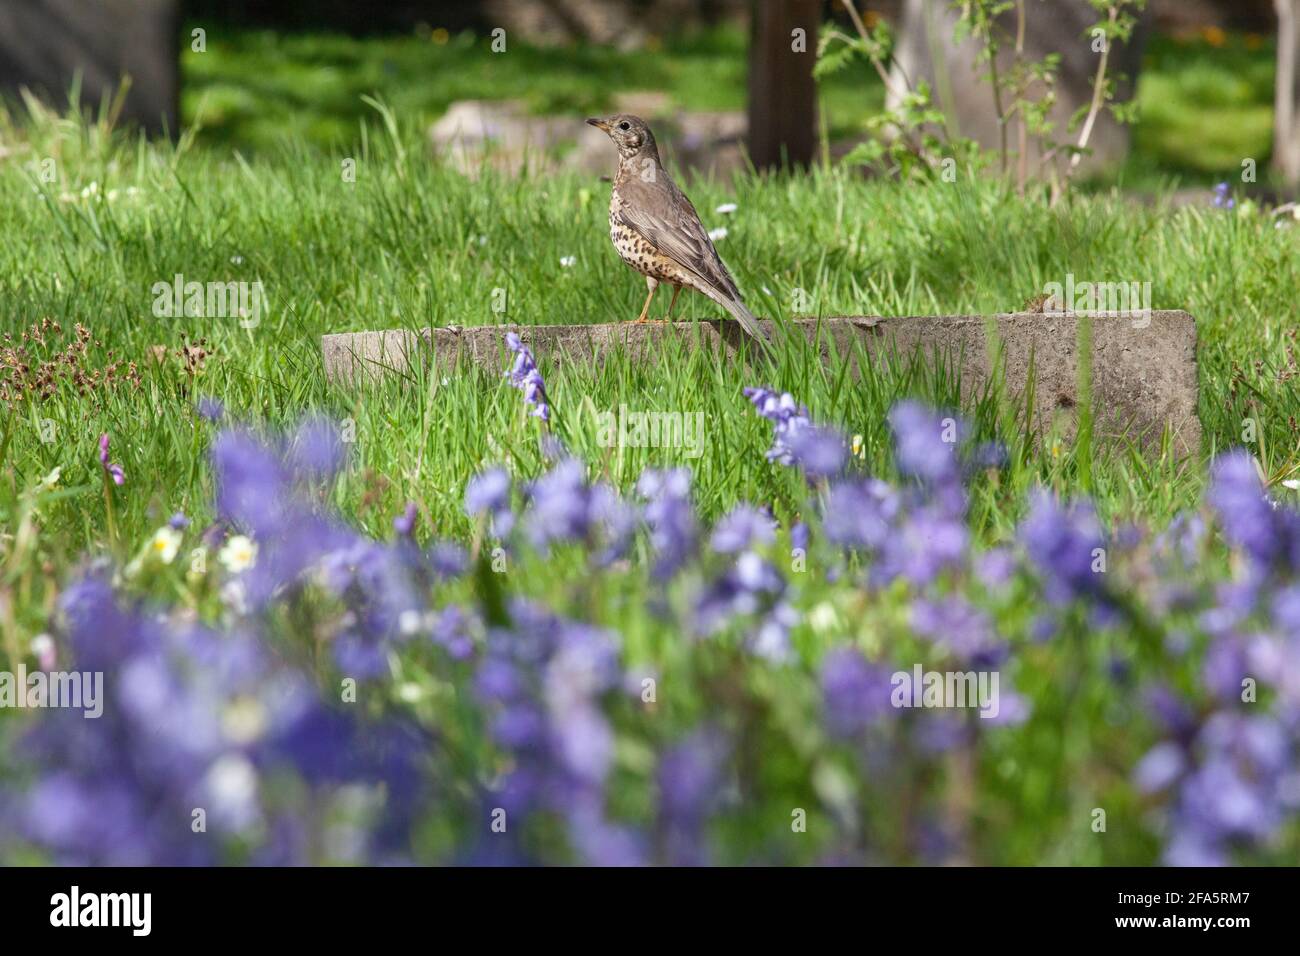 UK Weather, London, 23 April 2021: In Battersea Rise Cemetery a song thrush forages for food amongst the headstones and the spring display of bluebells. Anna Watson/Alamy Live News Stock Photo